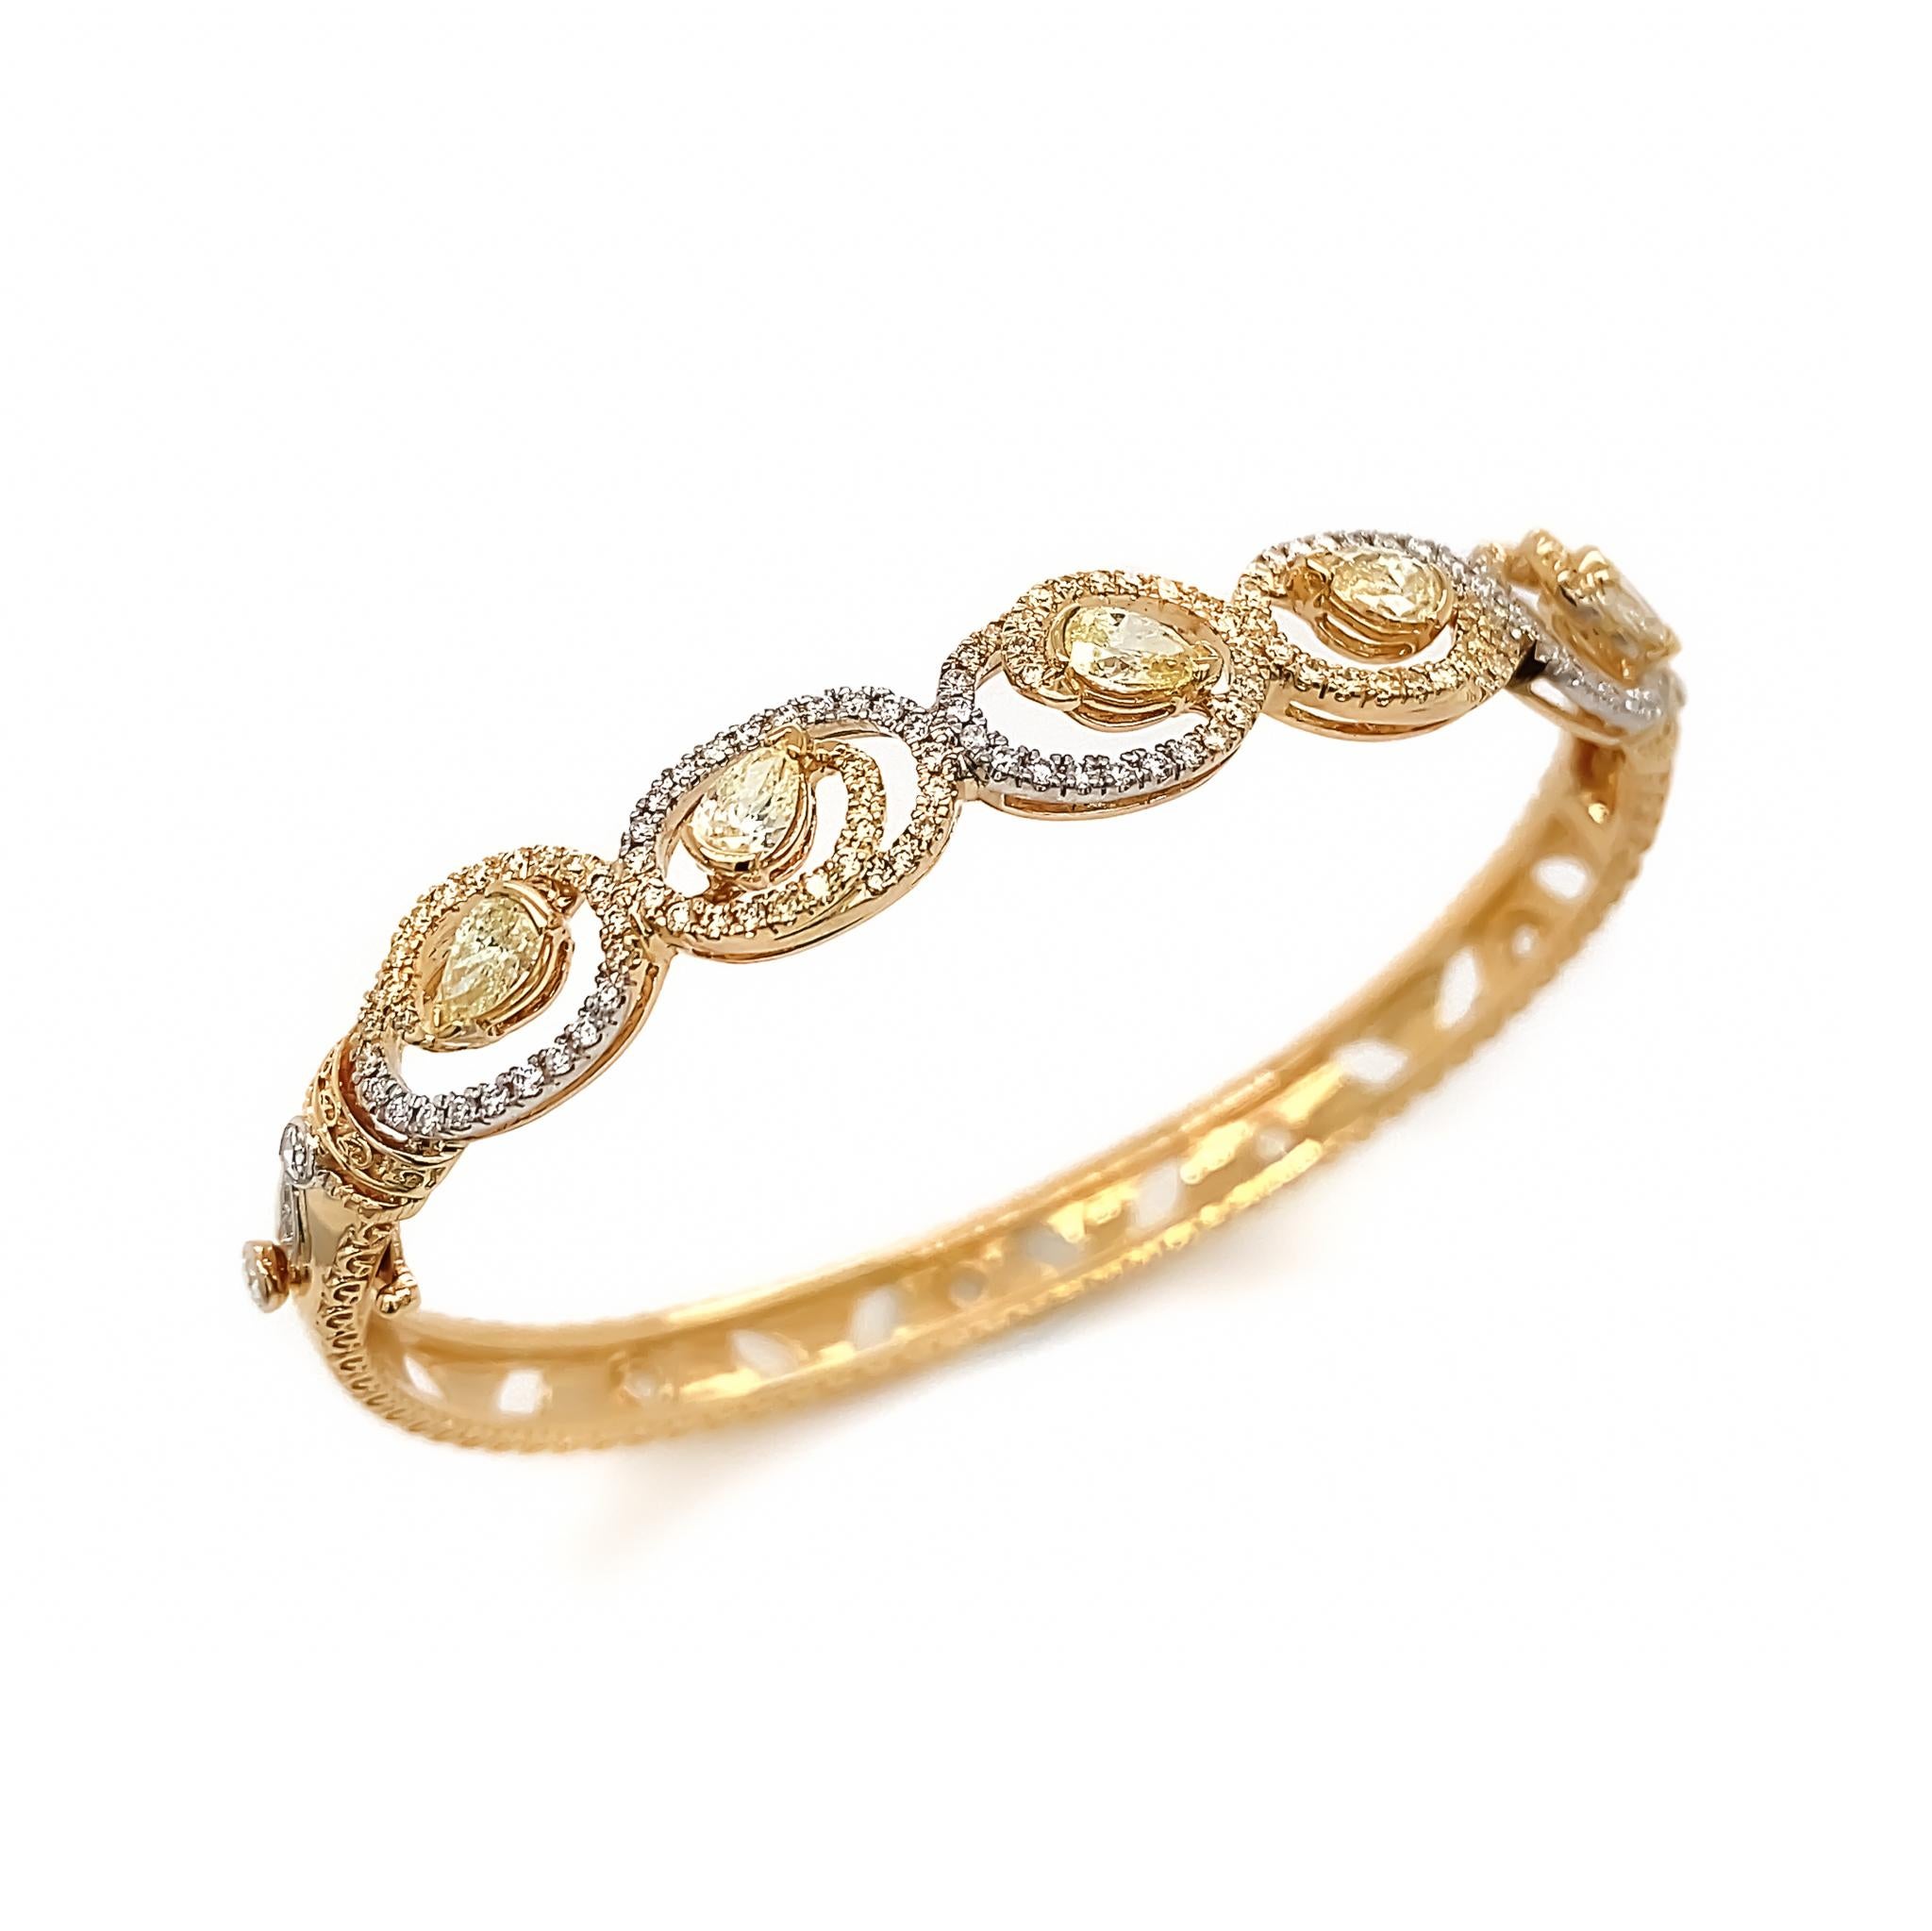 Dilys' bangles never fail to complete and elevate a look with beautiful natural gemstones and exquisite craftsmanship. Rest assured, the white diamonds used are collection-grade only (even the melee stones), meaning D-F colored – the closest to